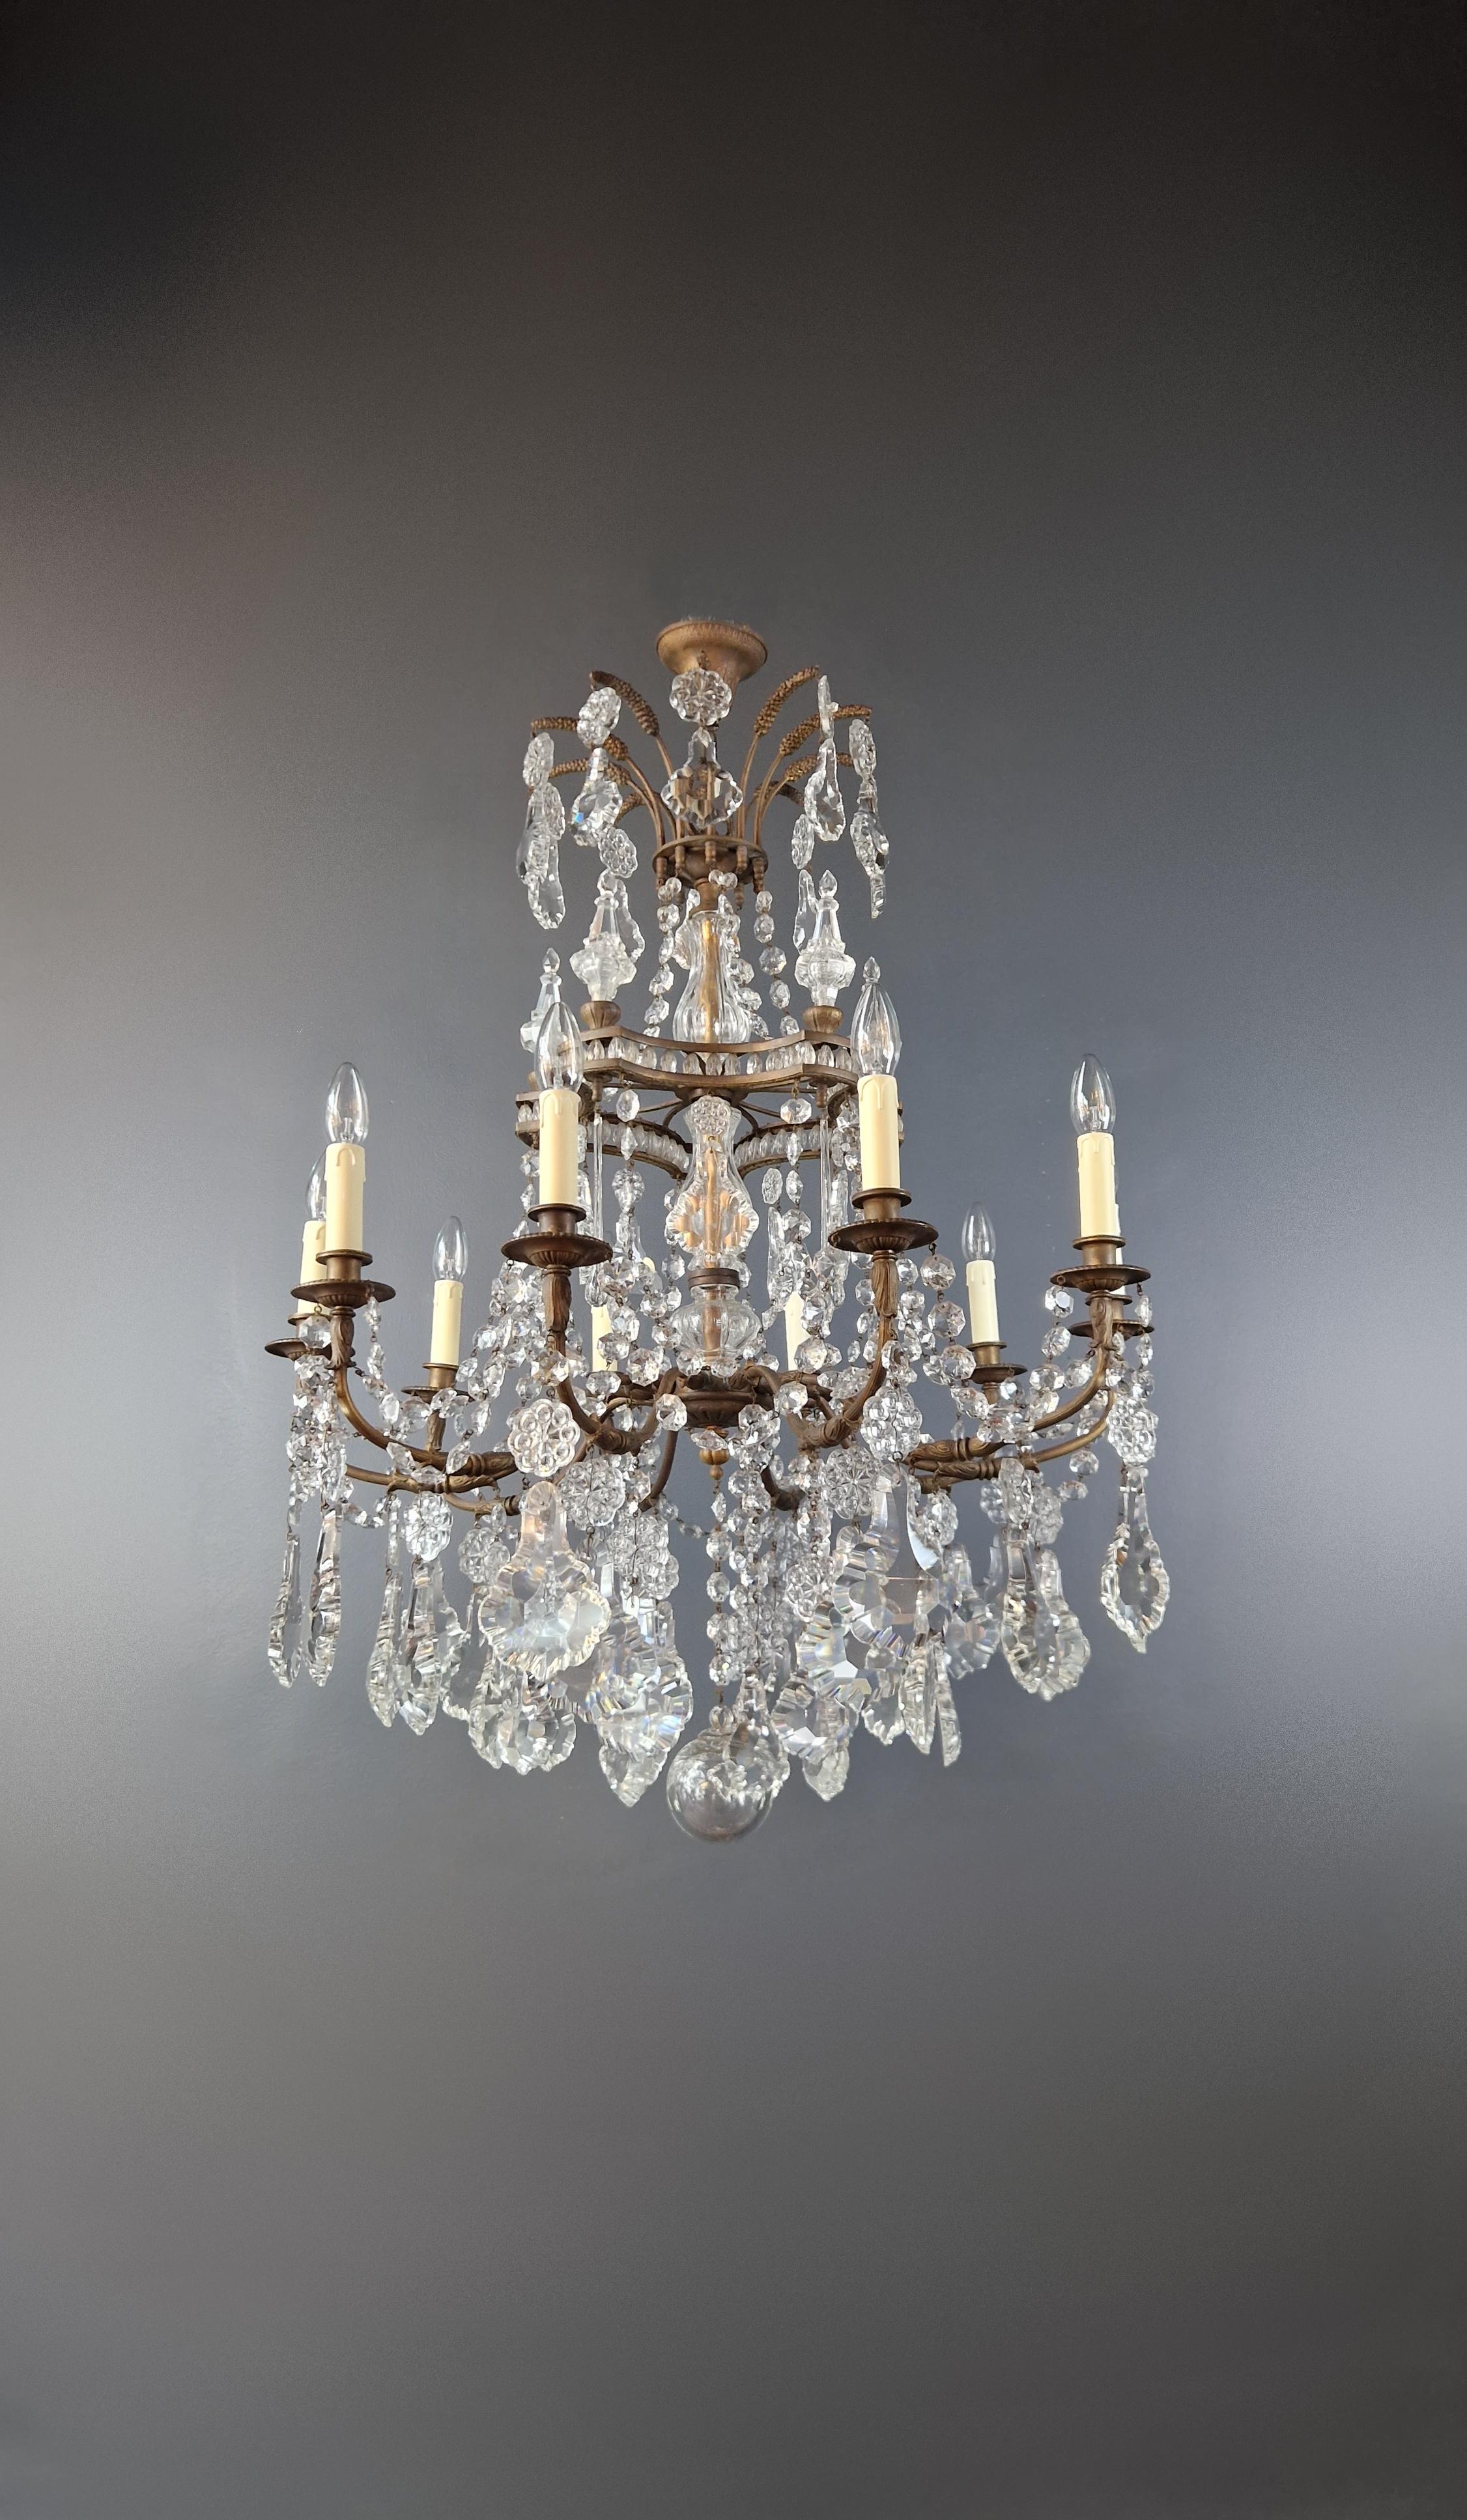 Baroque Art Nouveau Crystal Chandelier Brass Large Crystals Traditional Antique Ceiling For Sale